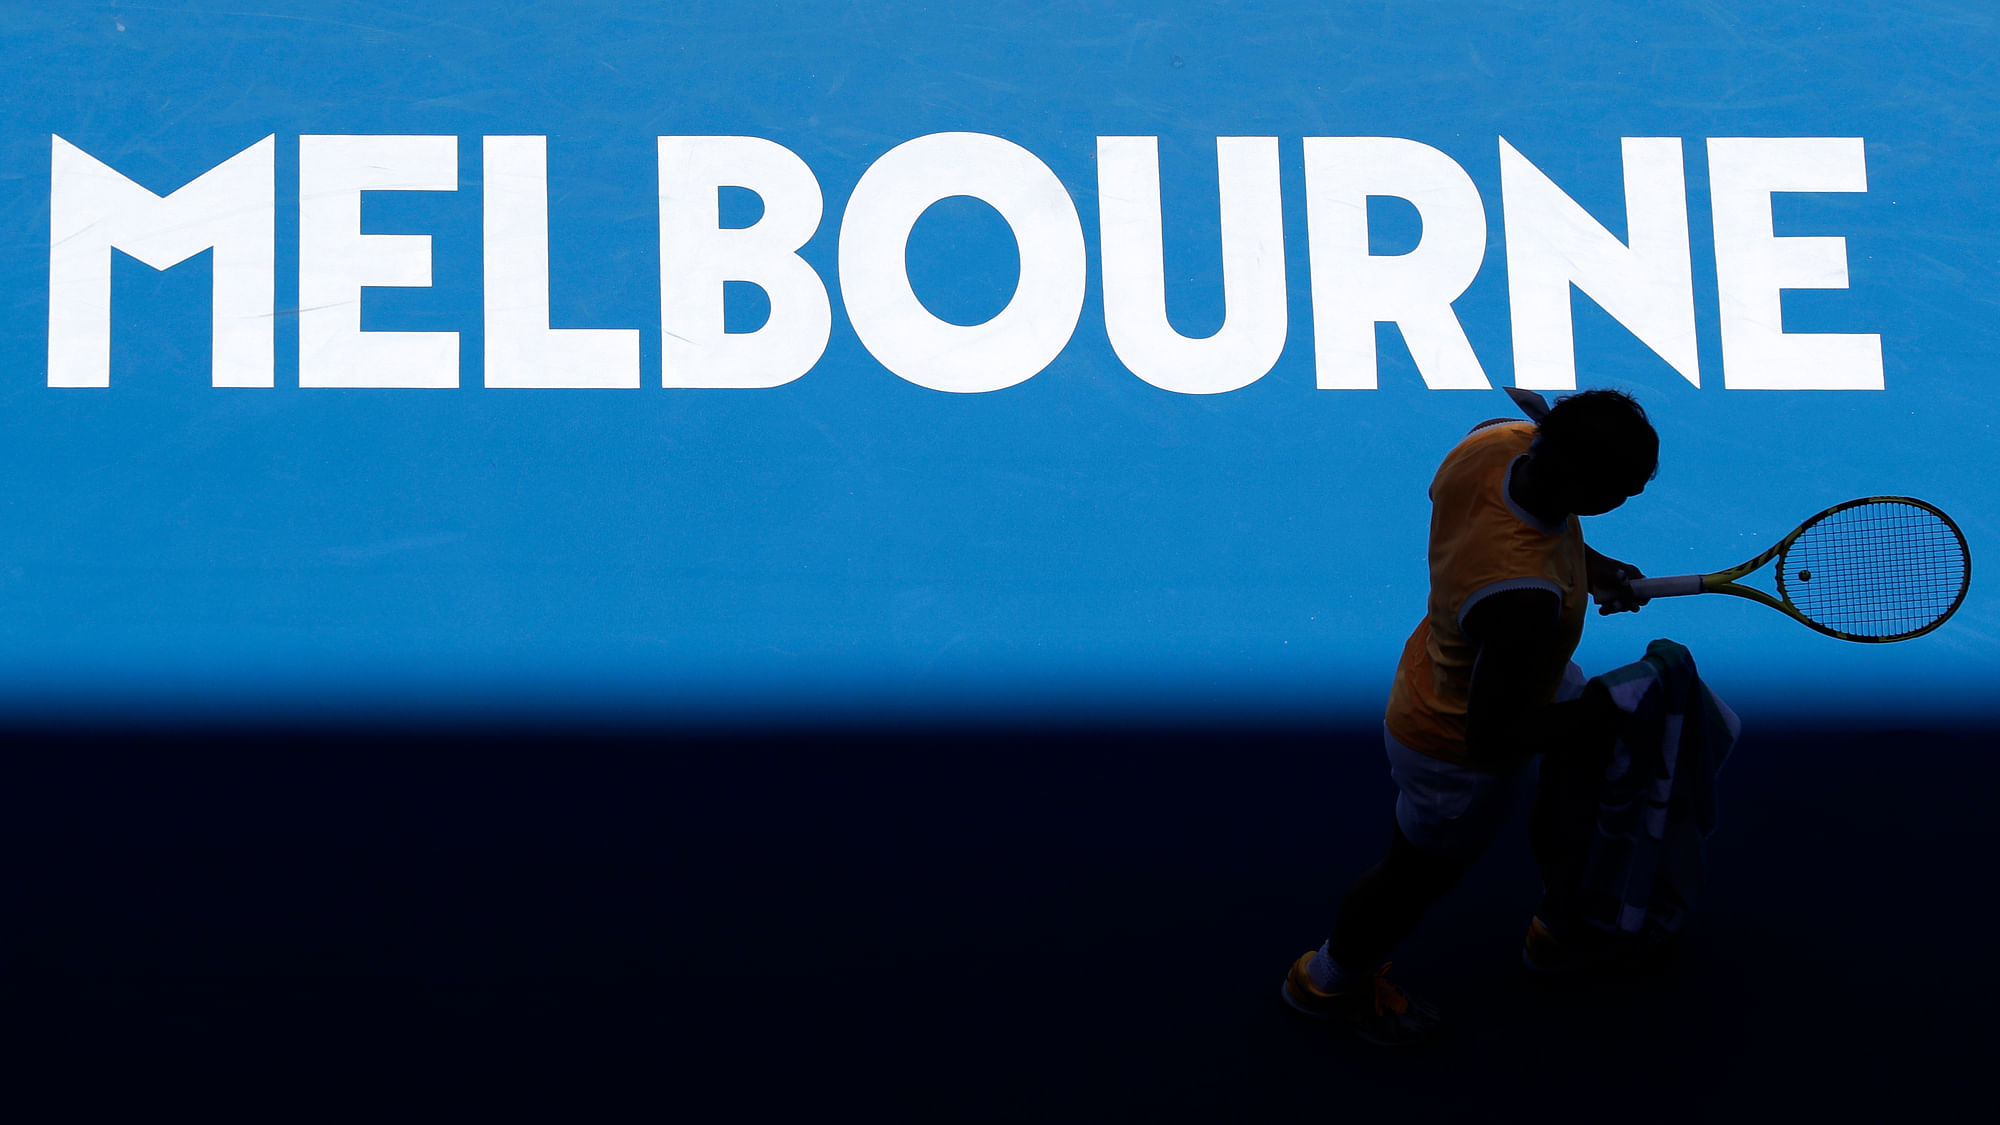 Latest results from Day 1 of the Australian Open in Melbourne.